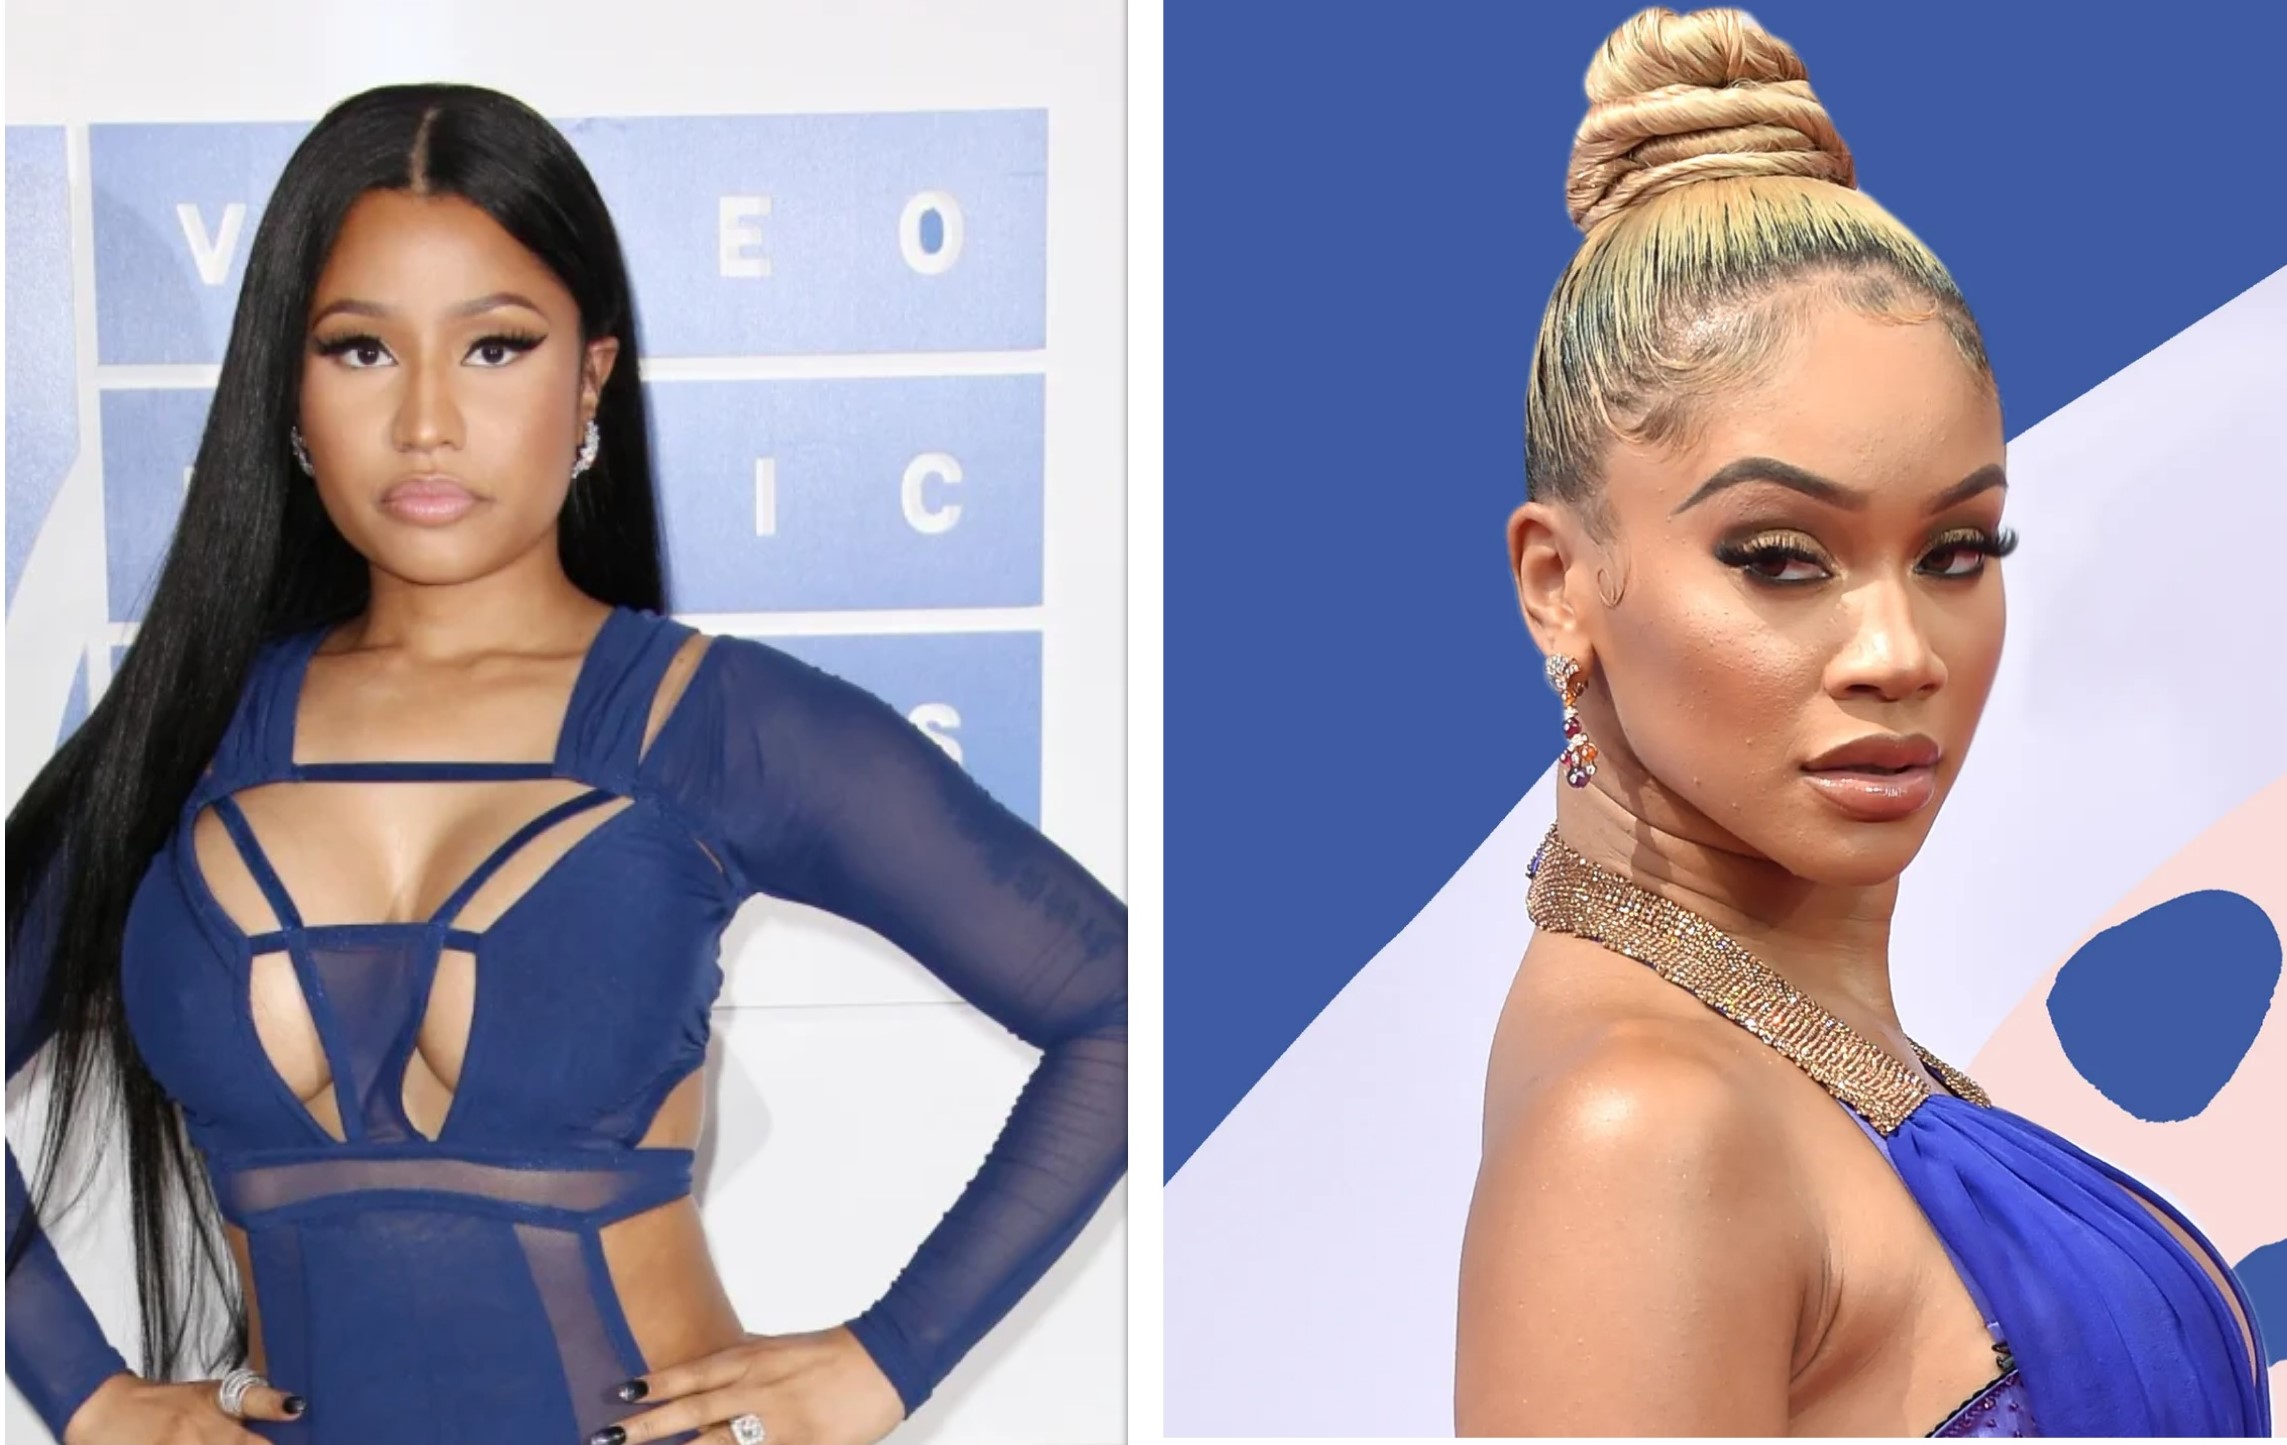 Nicki Minaj hit with accusations that she jacked “Barbie World” song from Saweetie